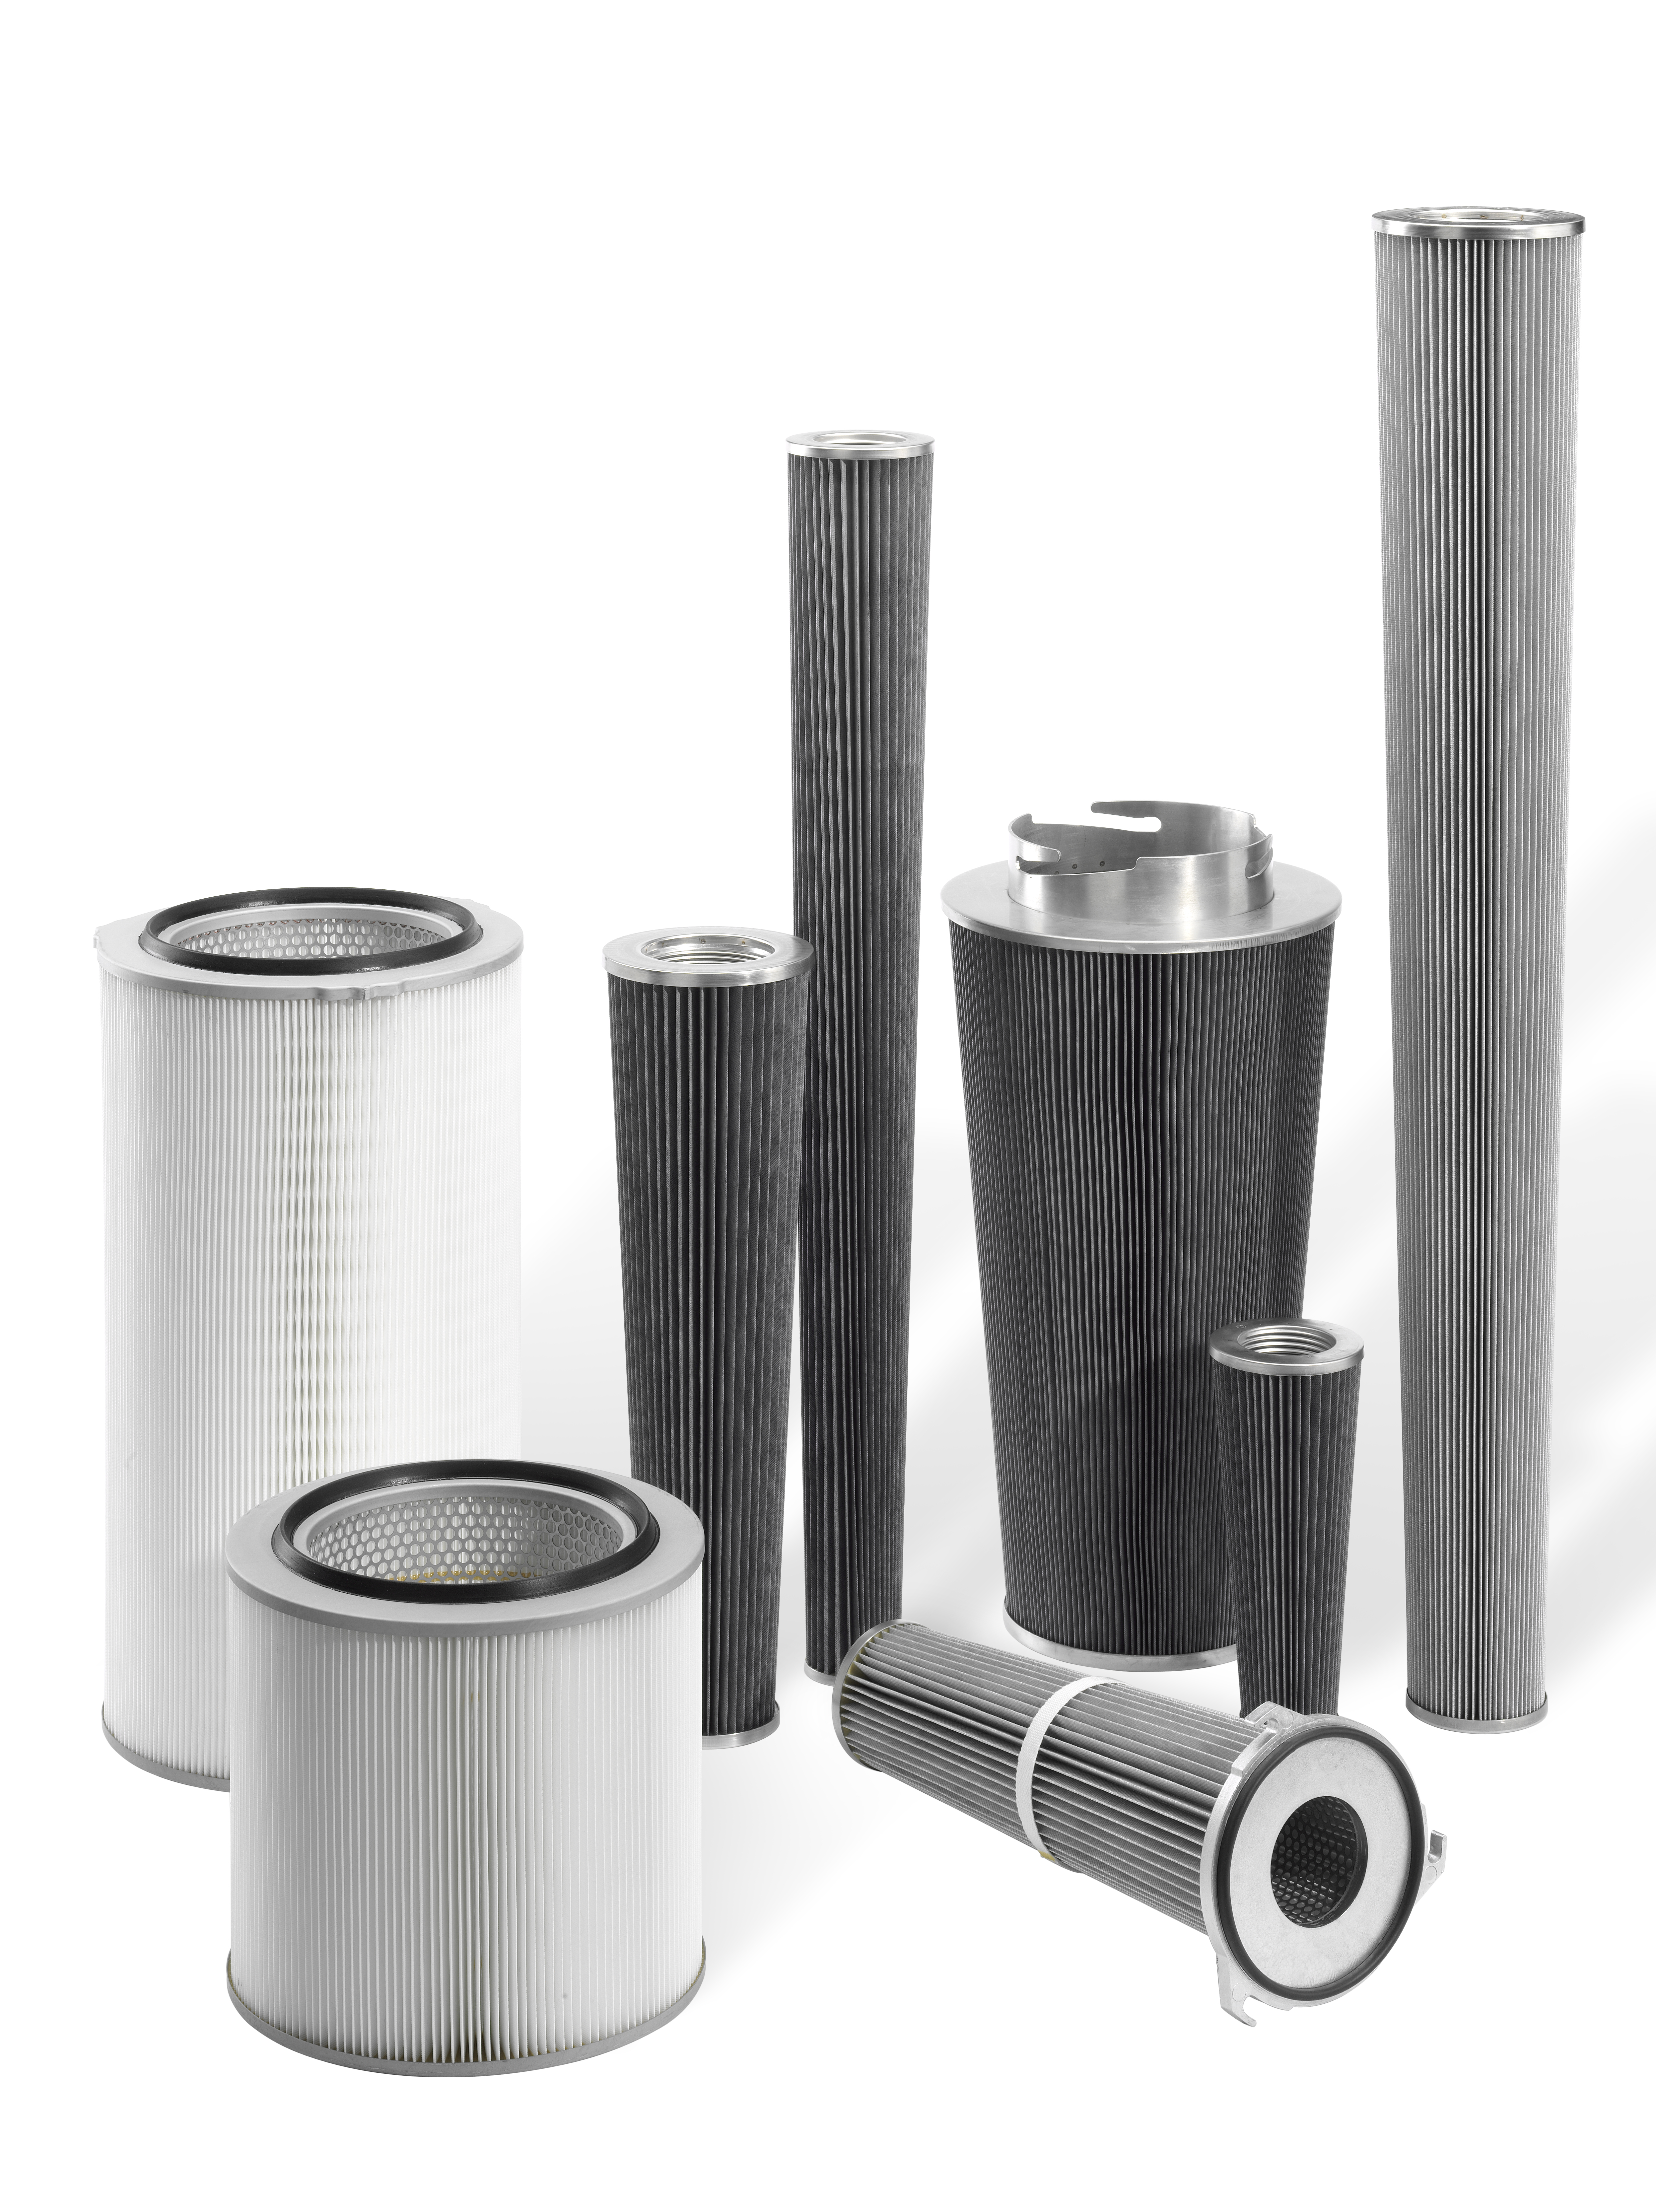 Why our filter cartridges can help keep the food industry moving